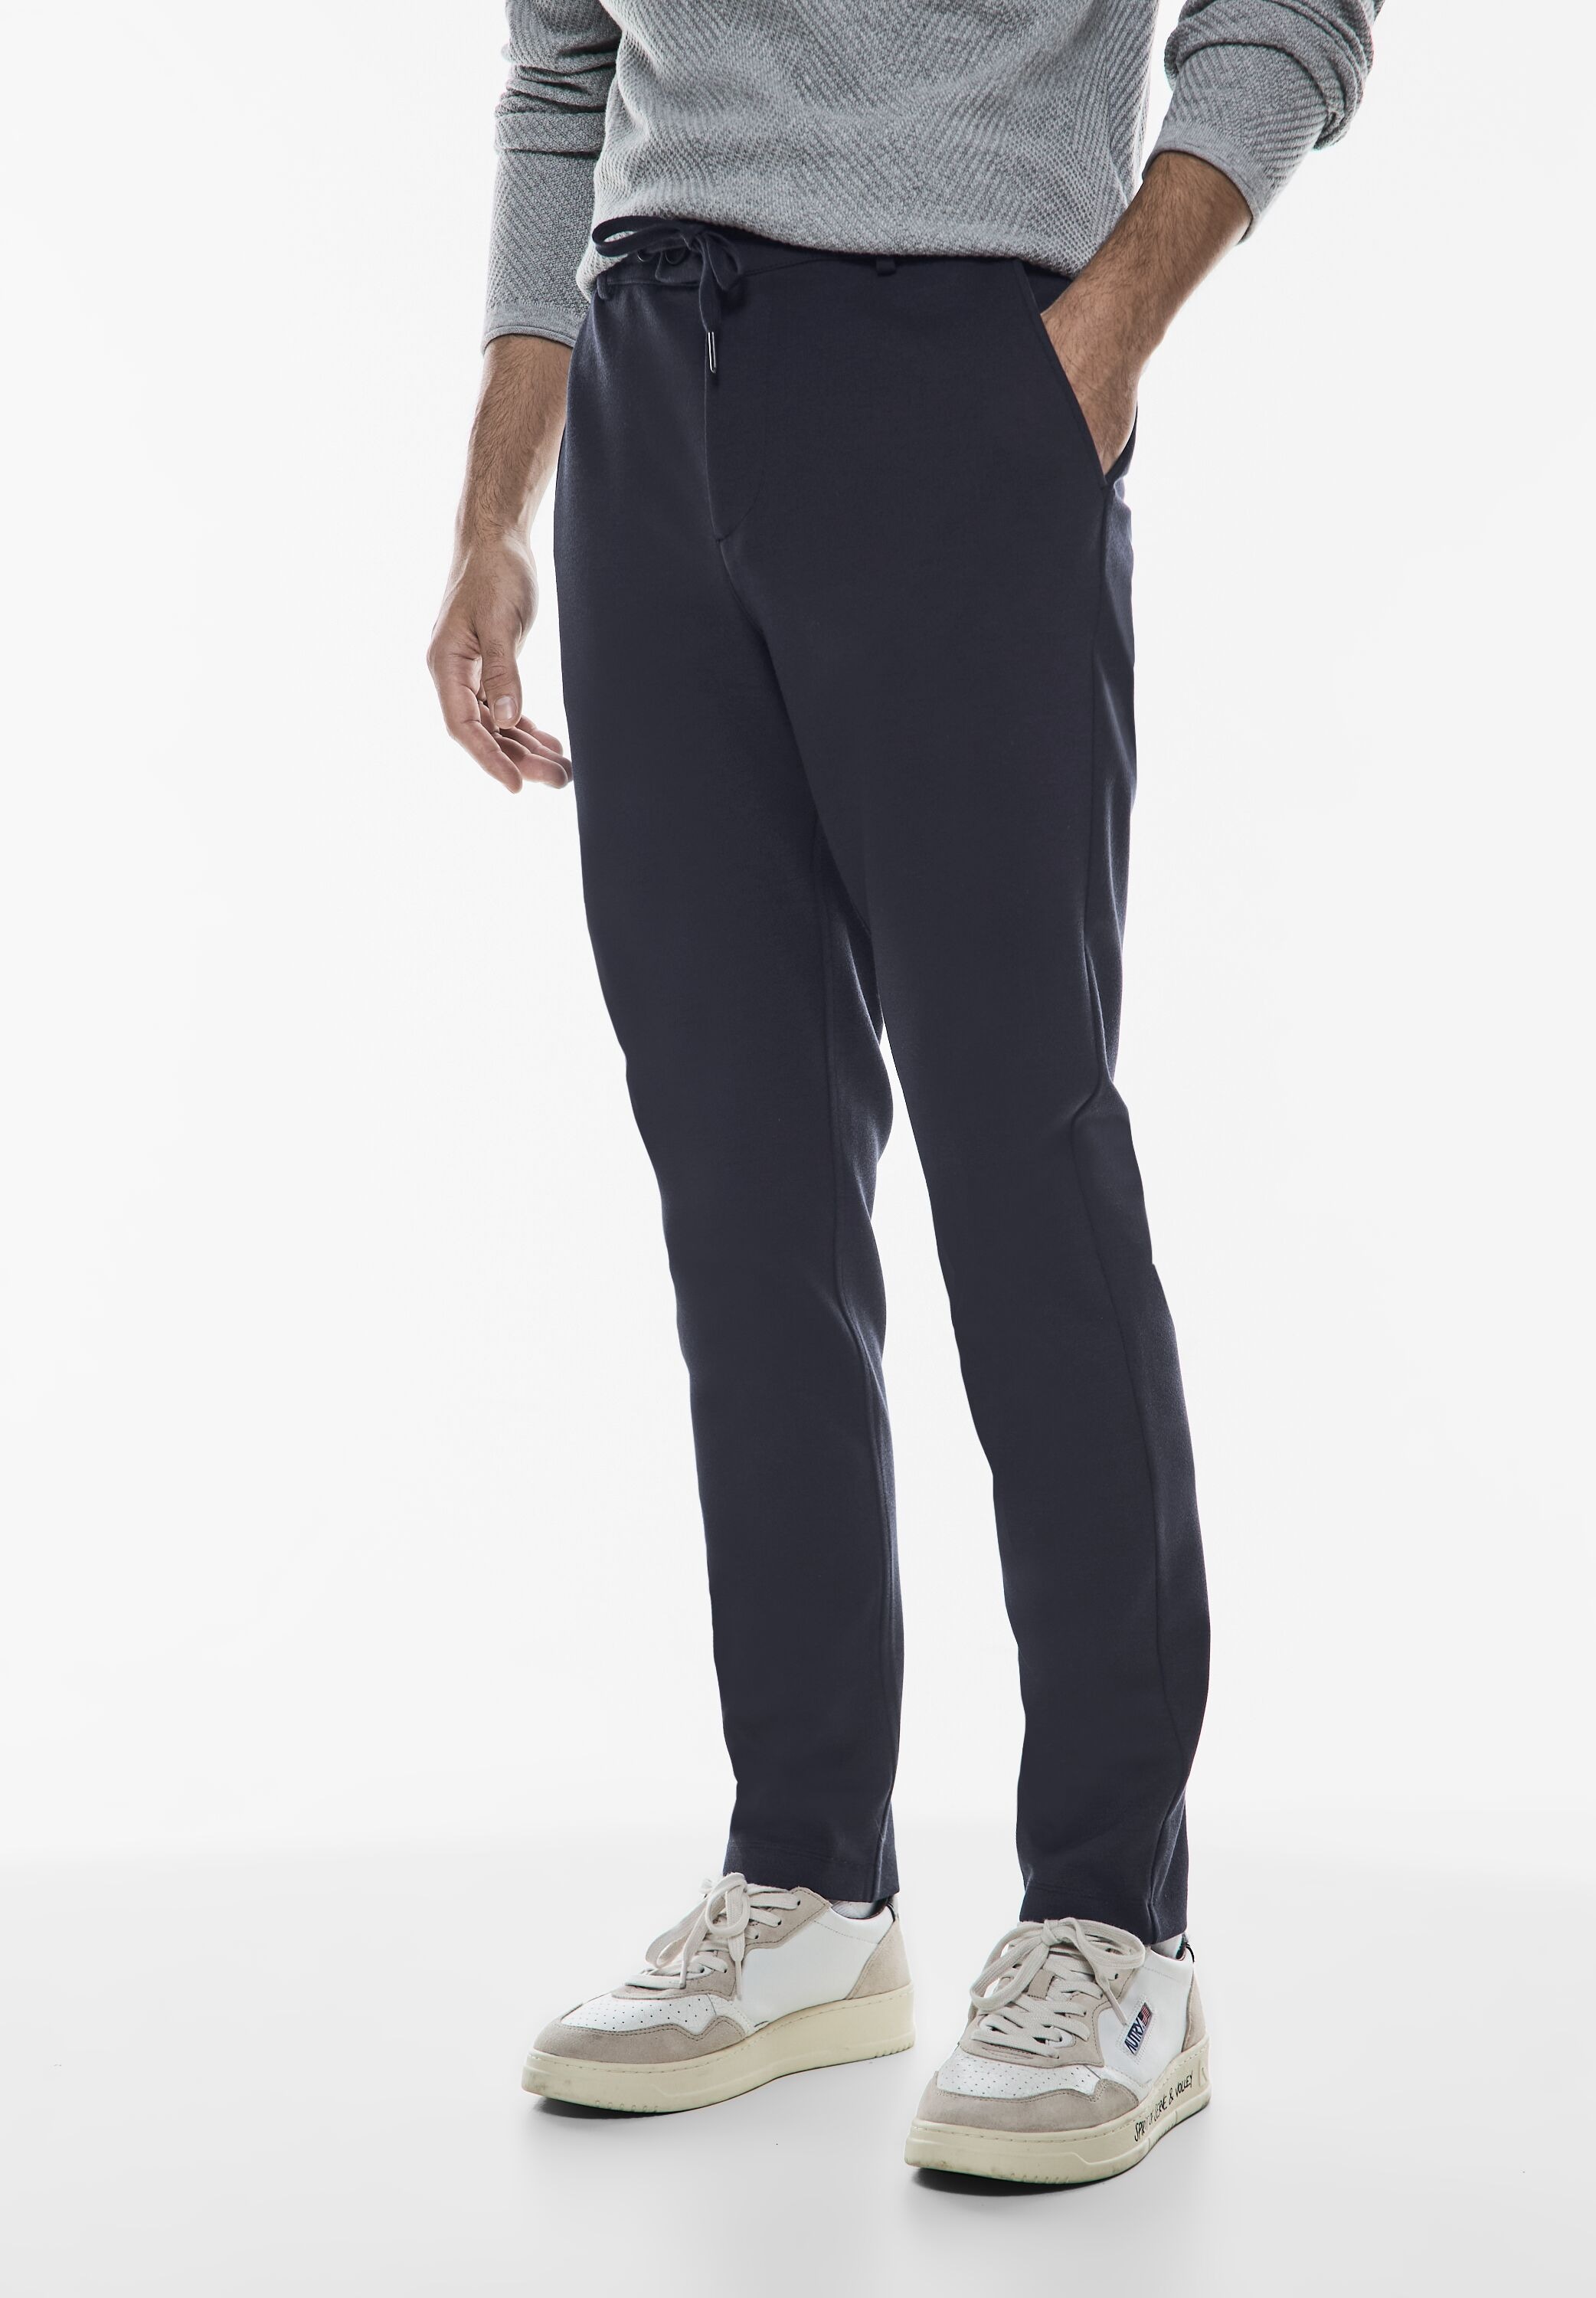 Chinos, softer Materialmix